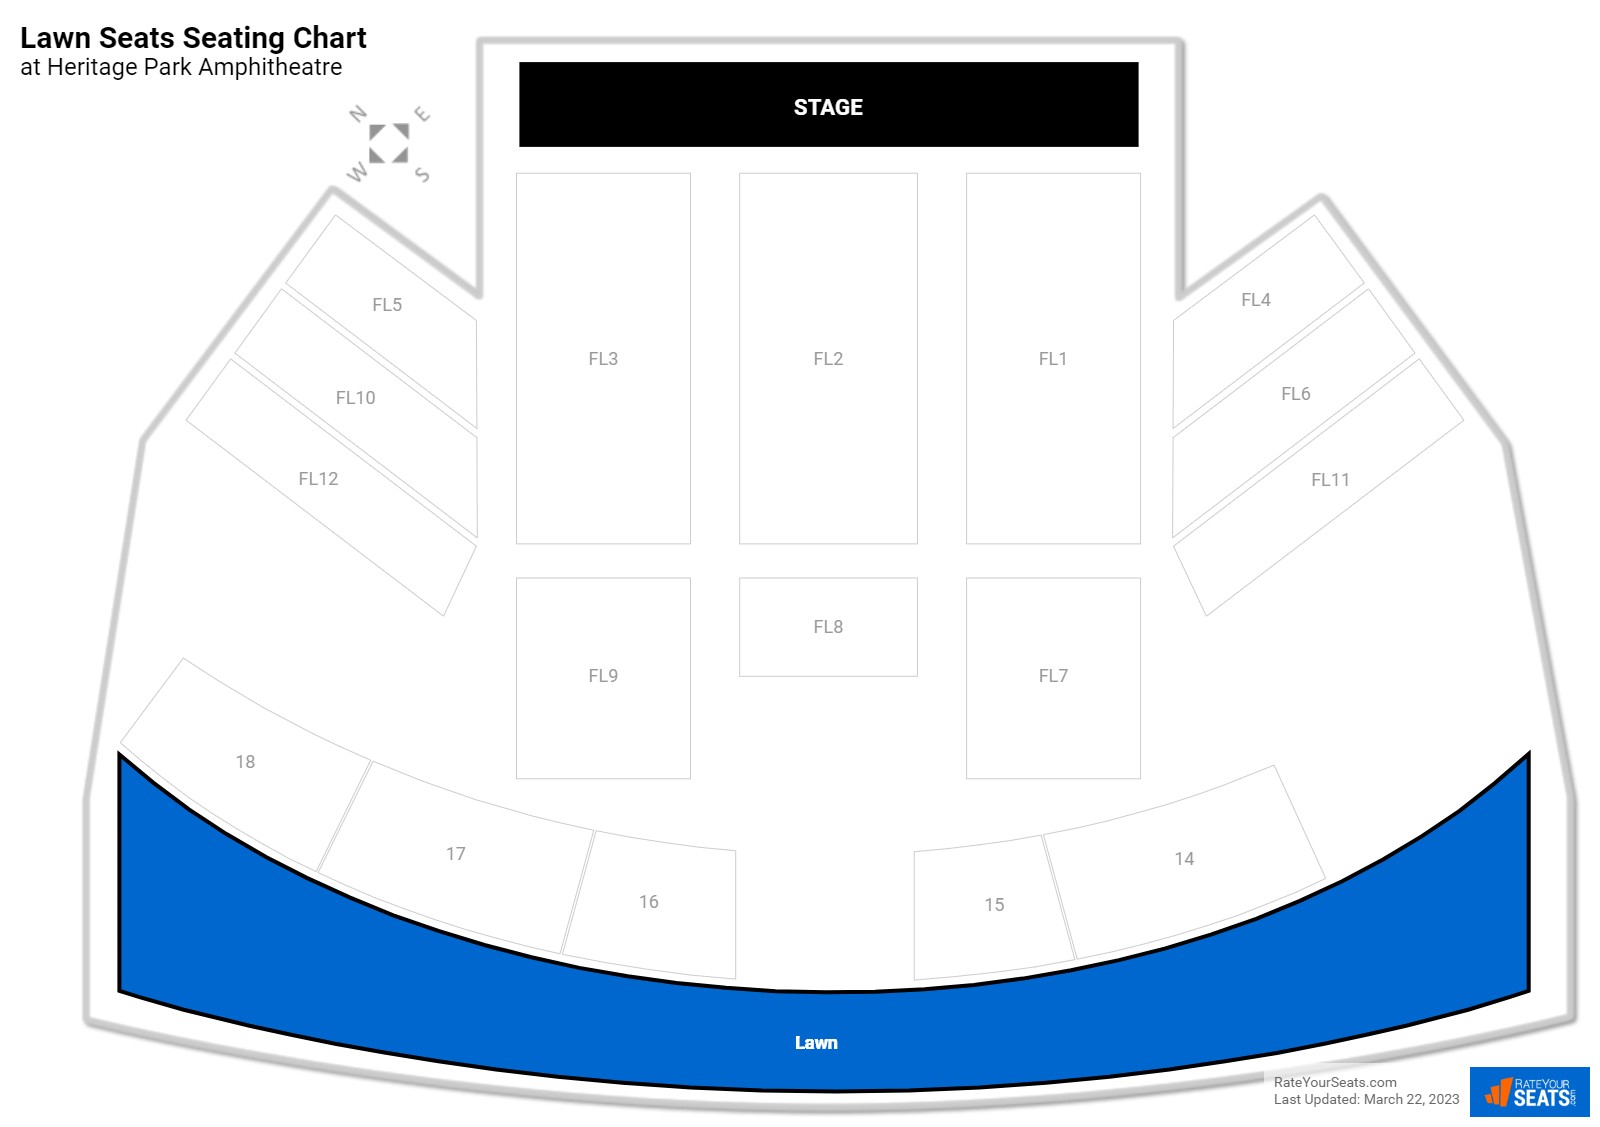 Concert Lawn Seats Seating Chart at Heritage Park Amphitheatre